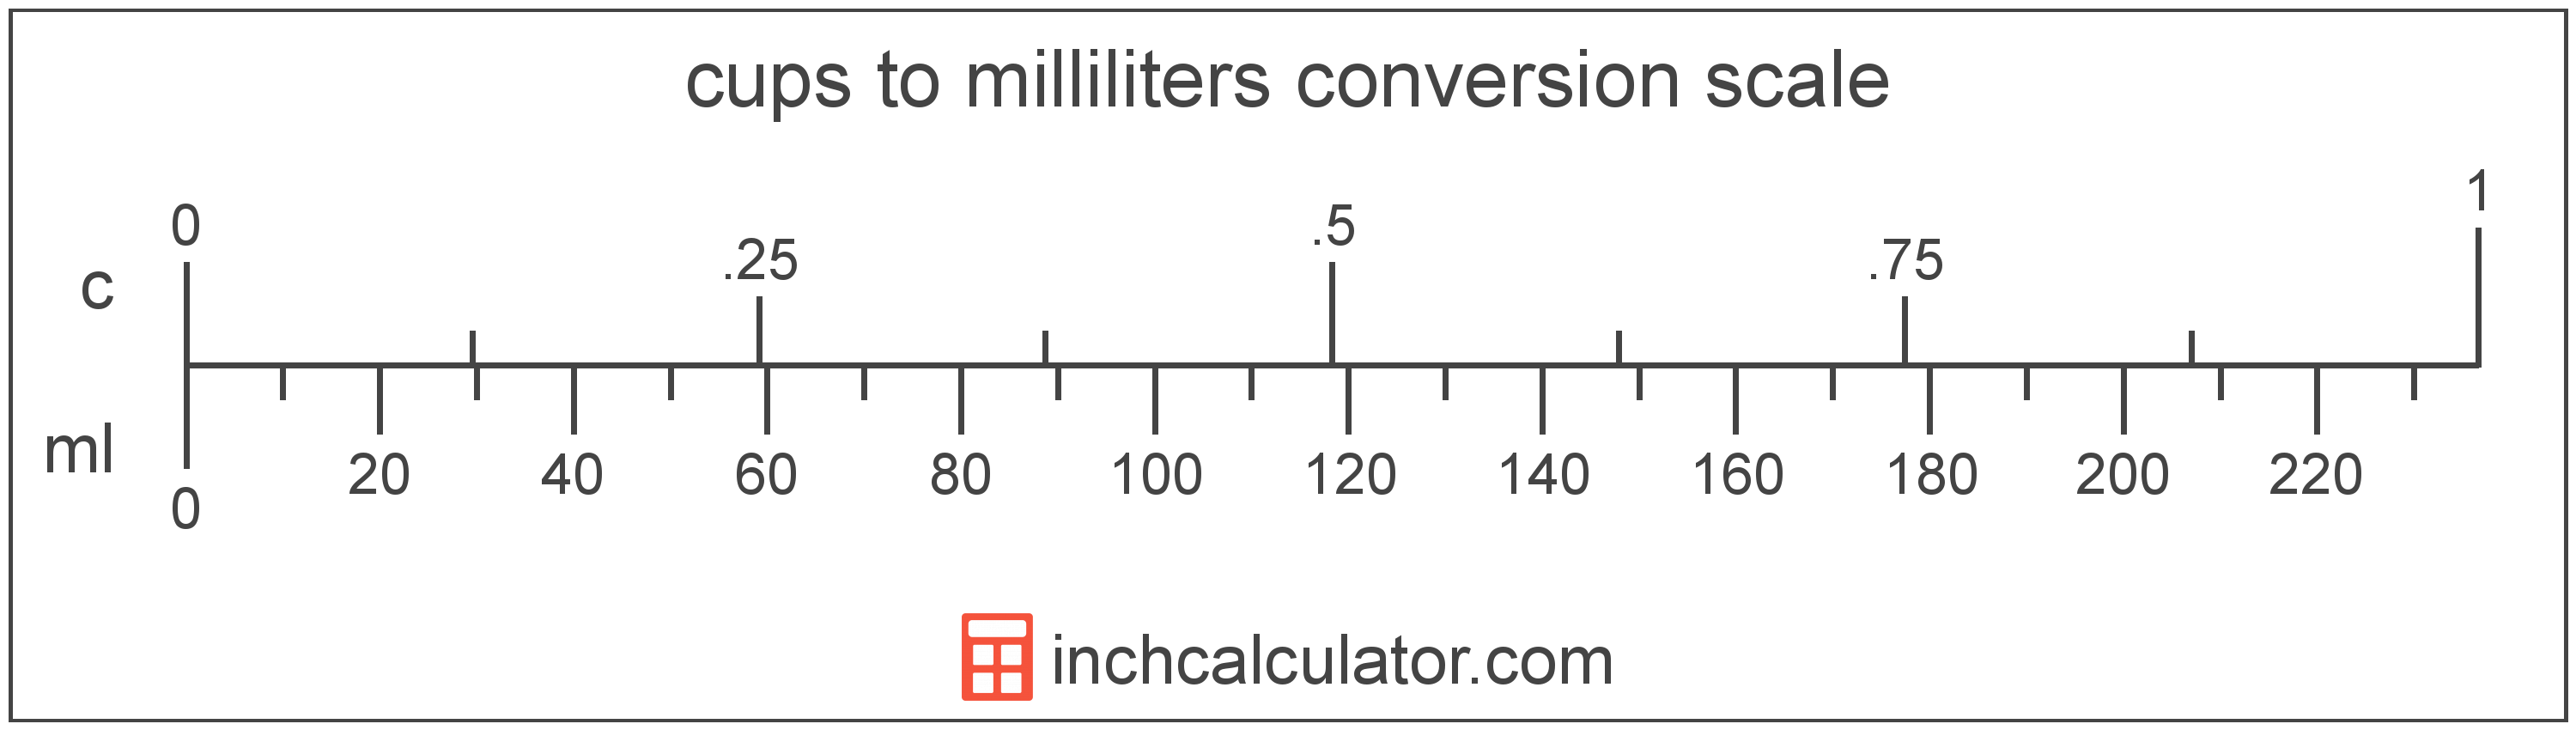 conversion scale showing milliliters and equivalent cups volume values